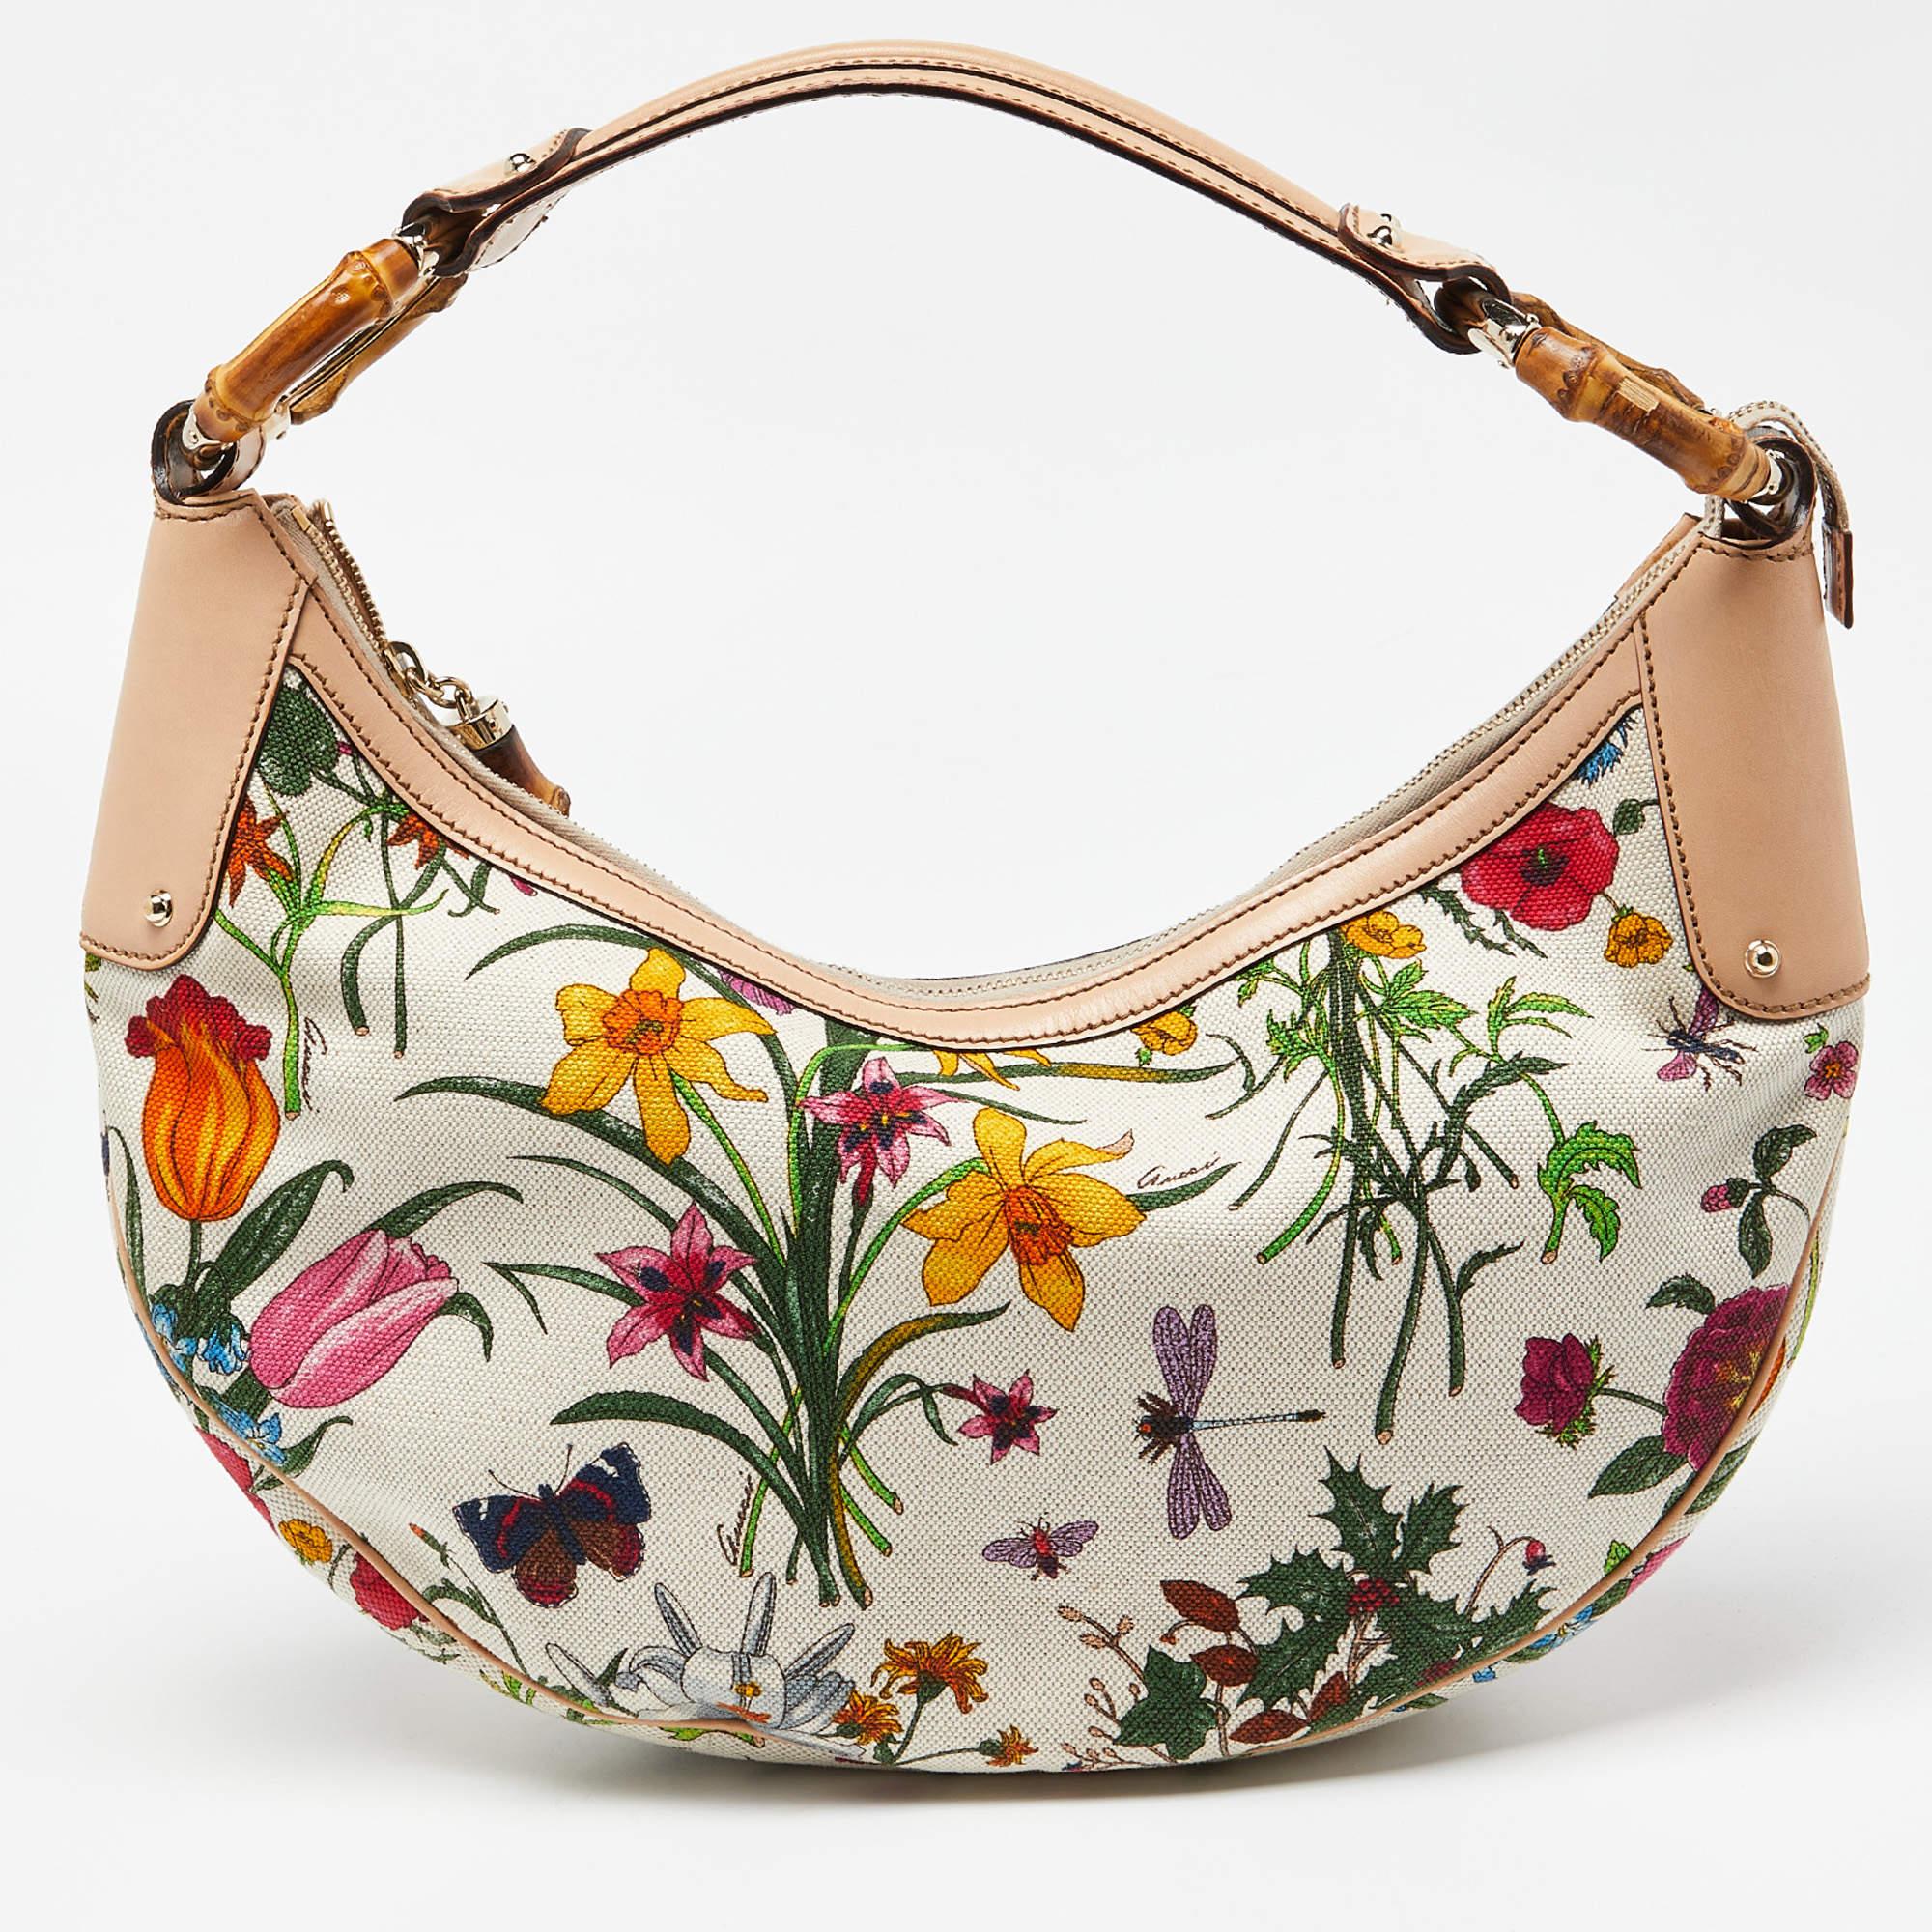 Created to look nothing but flawless, this Gucci hobo is a dream you can add to your collection! Fabulous in a multicolor botanical floral design, it comes crafted from canvas and leather and features a single top handle that is anchored by the